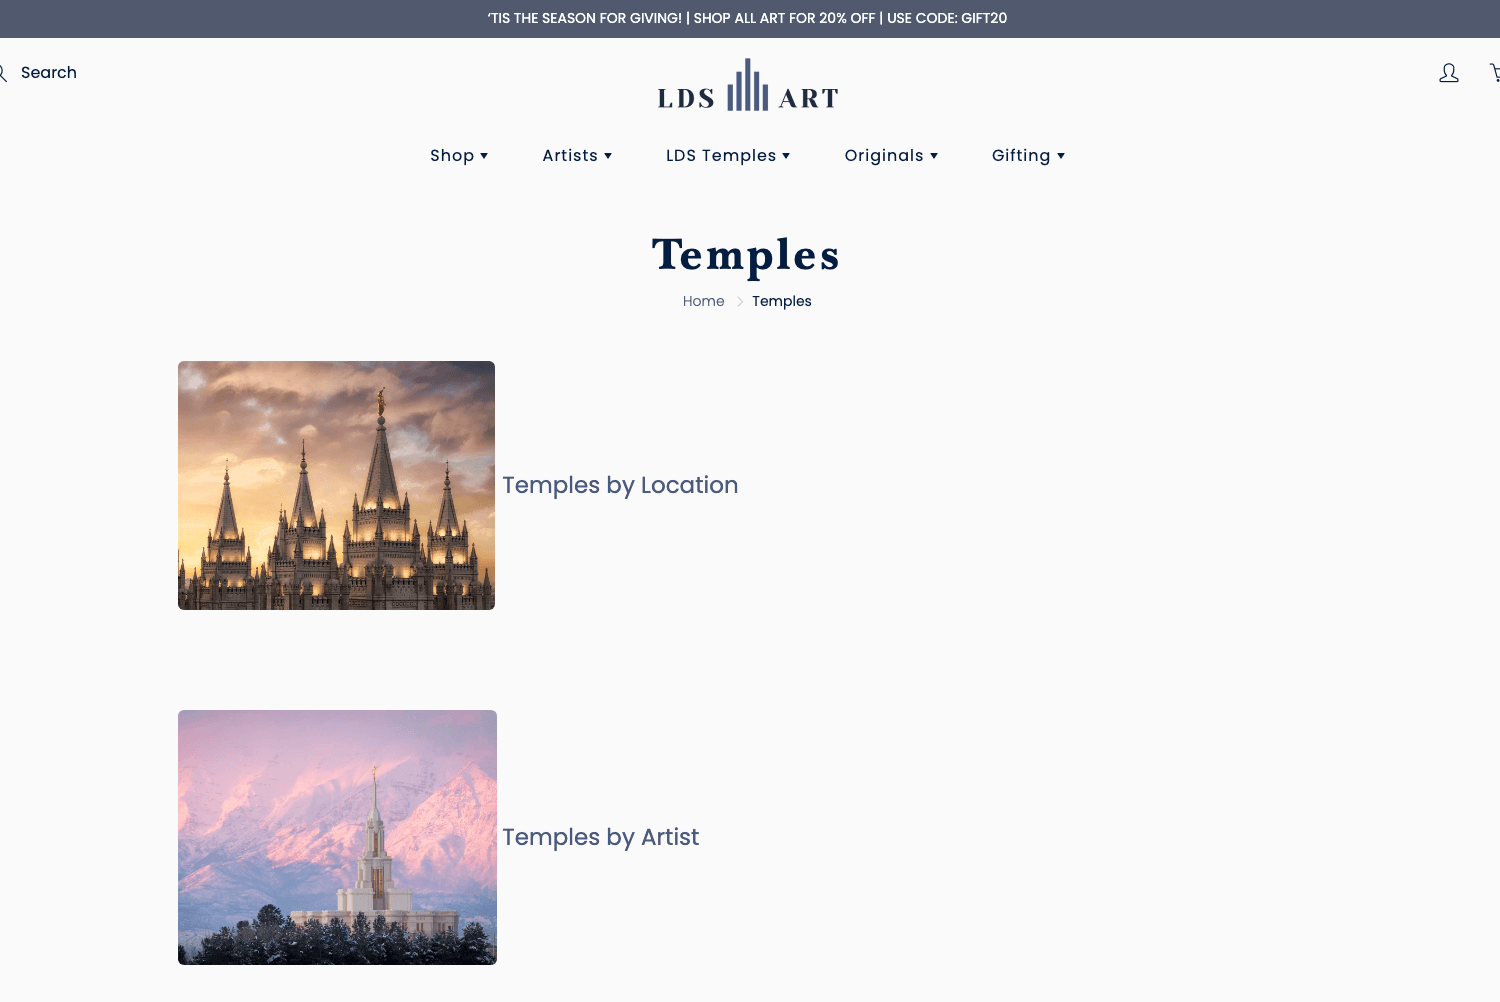 Simply Temples (301 Redirect LDS Art)